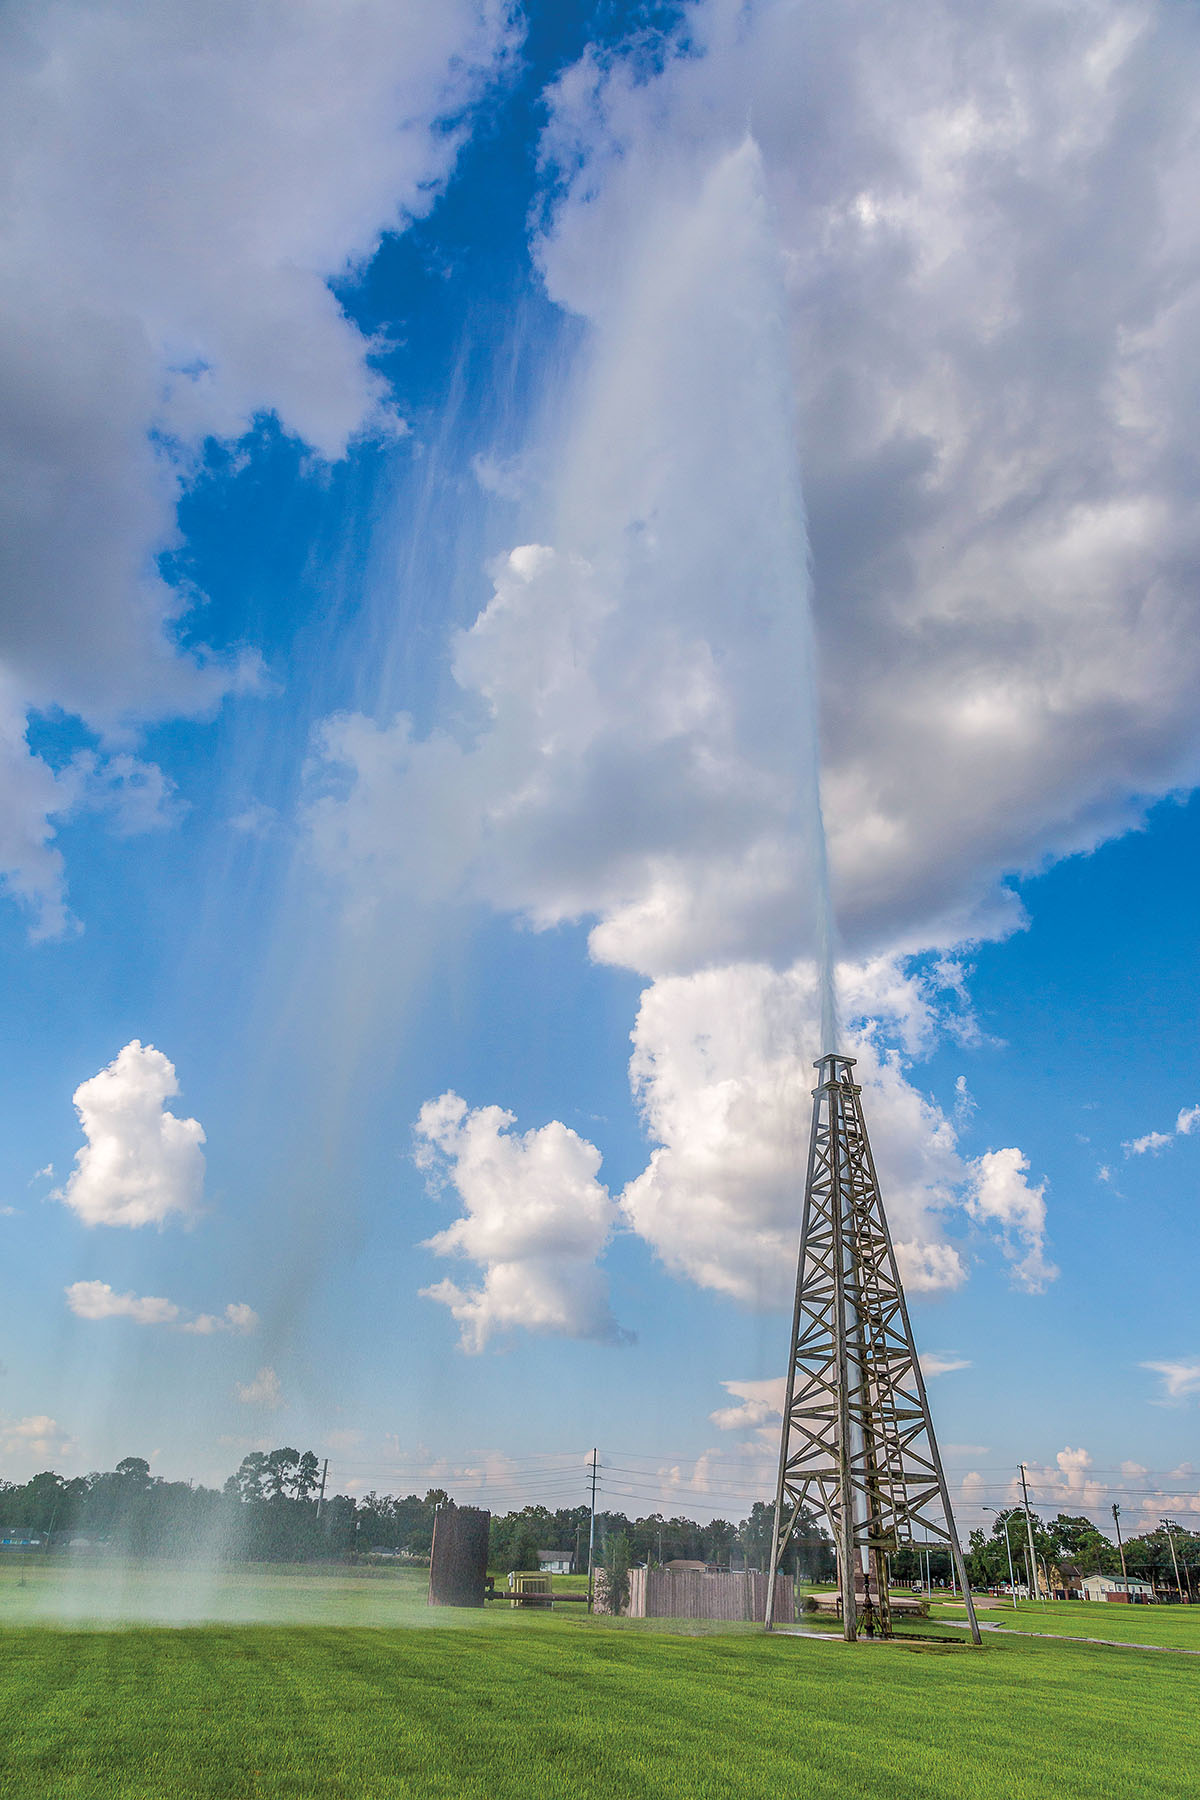 A tall steel structure spewing water from the top